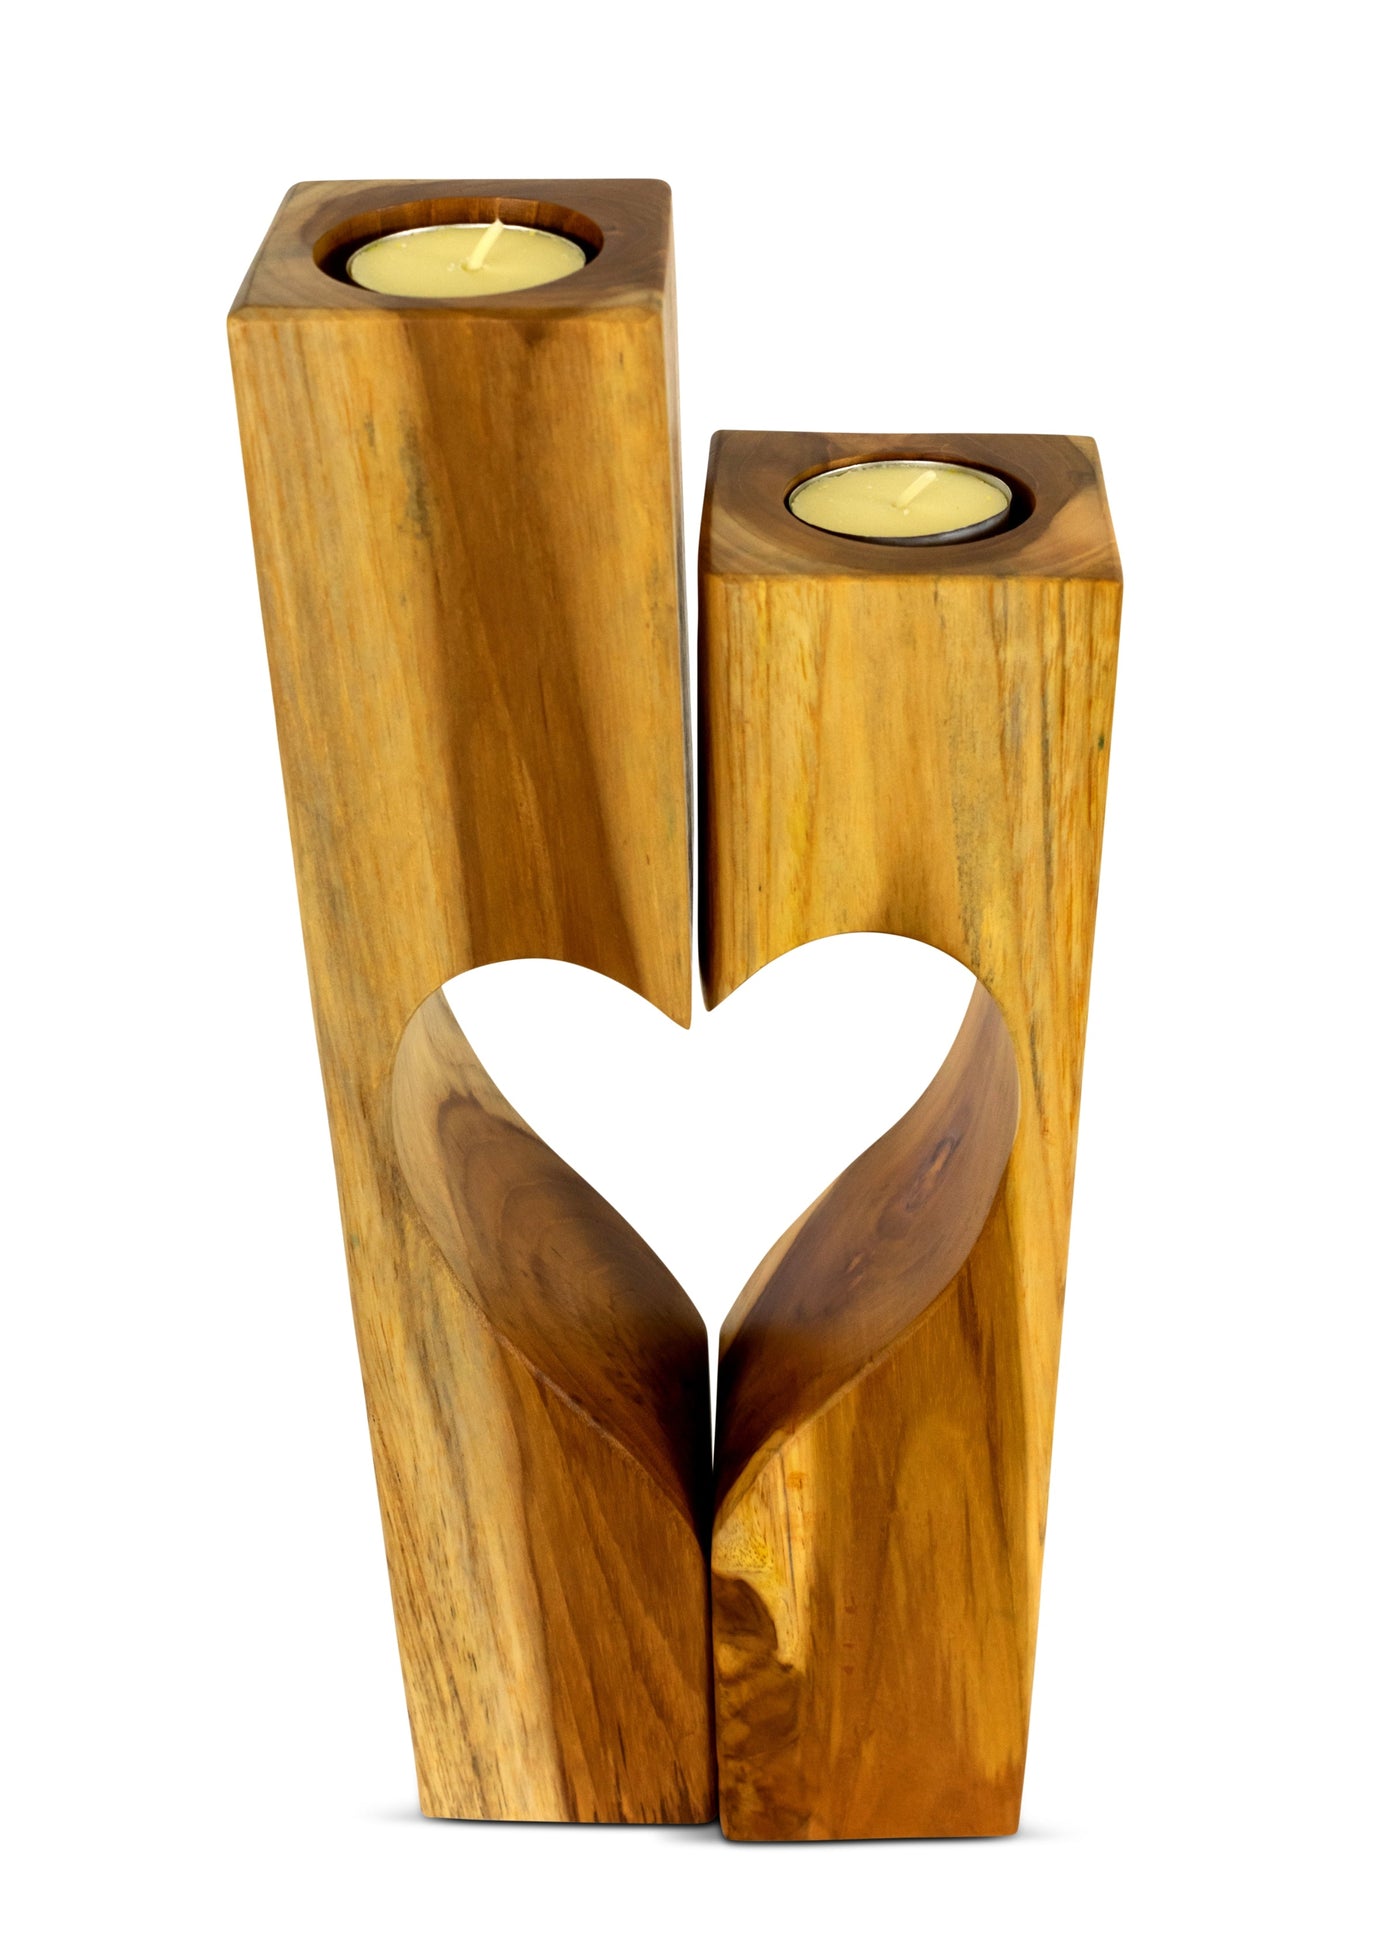 Set of 2 Wooden Hand Carved Candle Holder Heart Shaped Decorative Home Decor Accent Gift Handcrafted Decoration Candlestick Handmade Tea Light